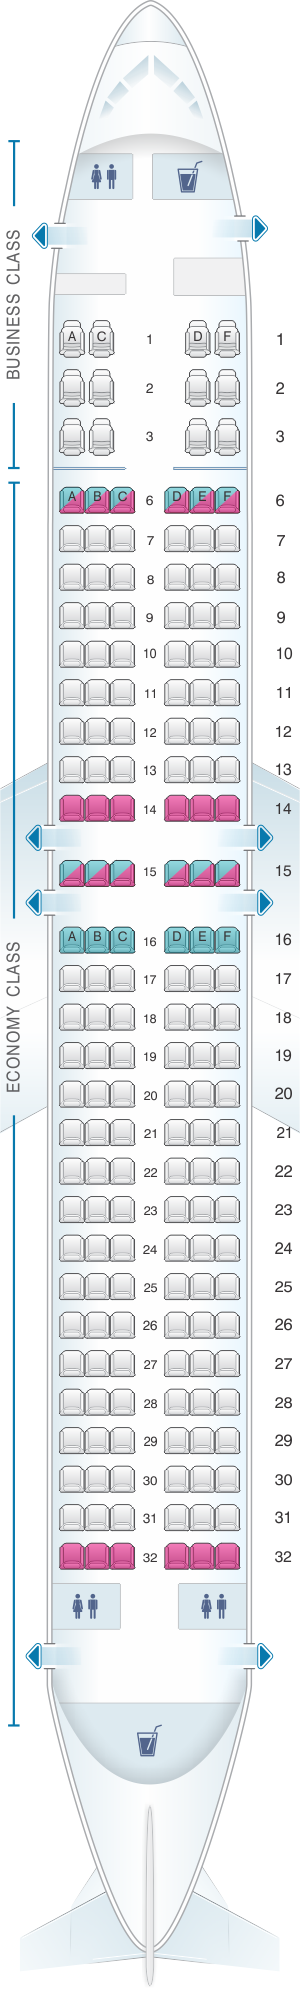 Seat map for Flydubai Boeing B737 800 Config. 2